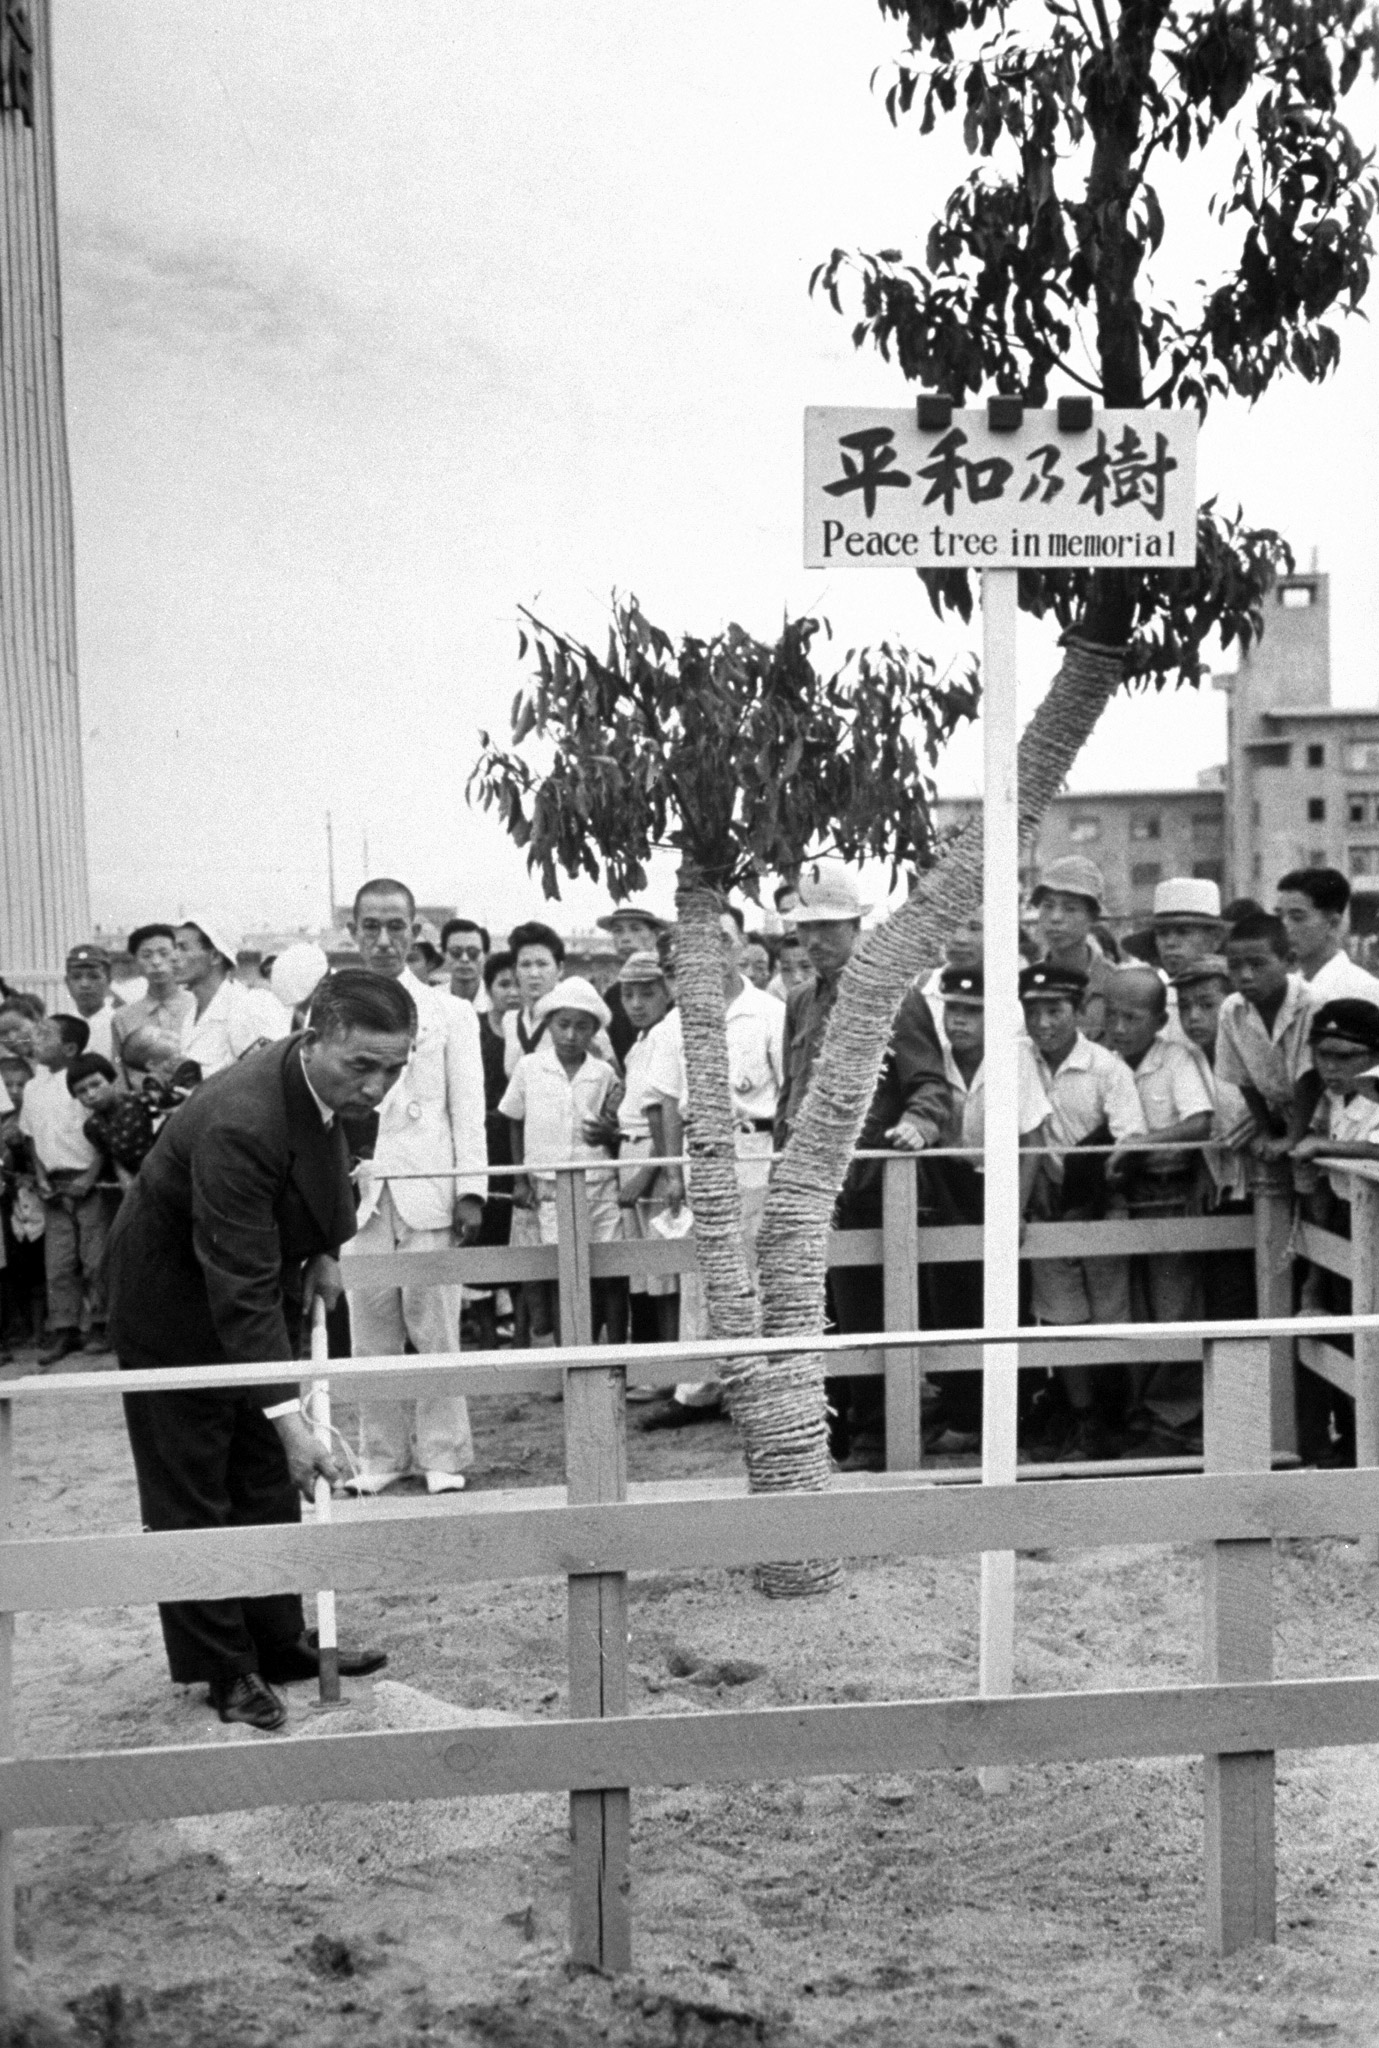 In peace square, the Governor of Hiroshima tamps the earth around a ceremonial camphor tree.